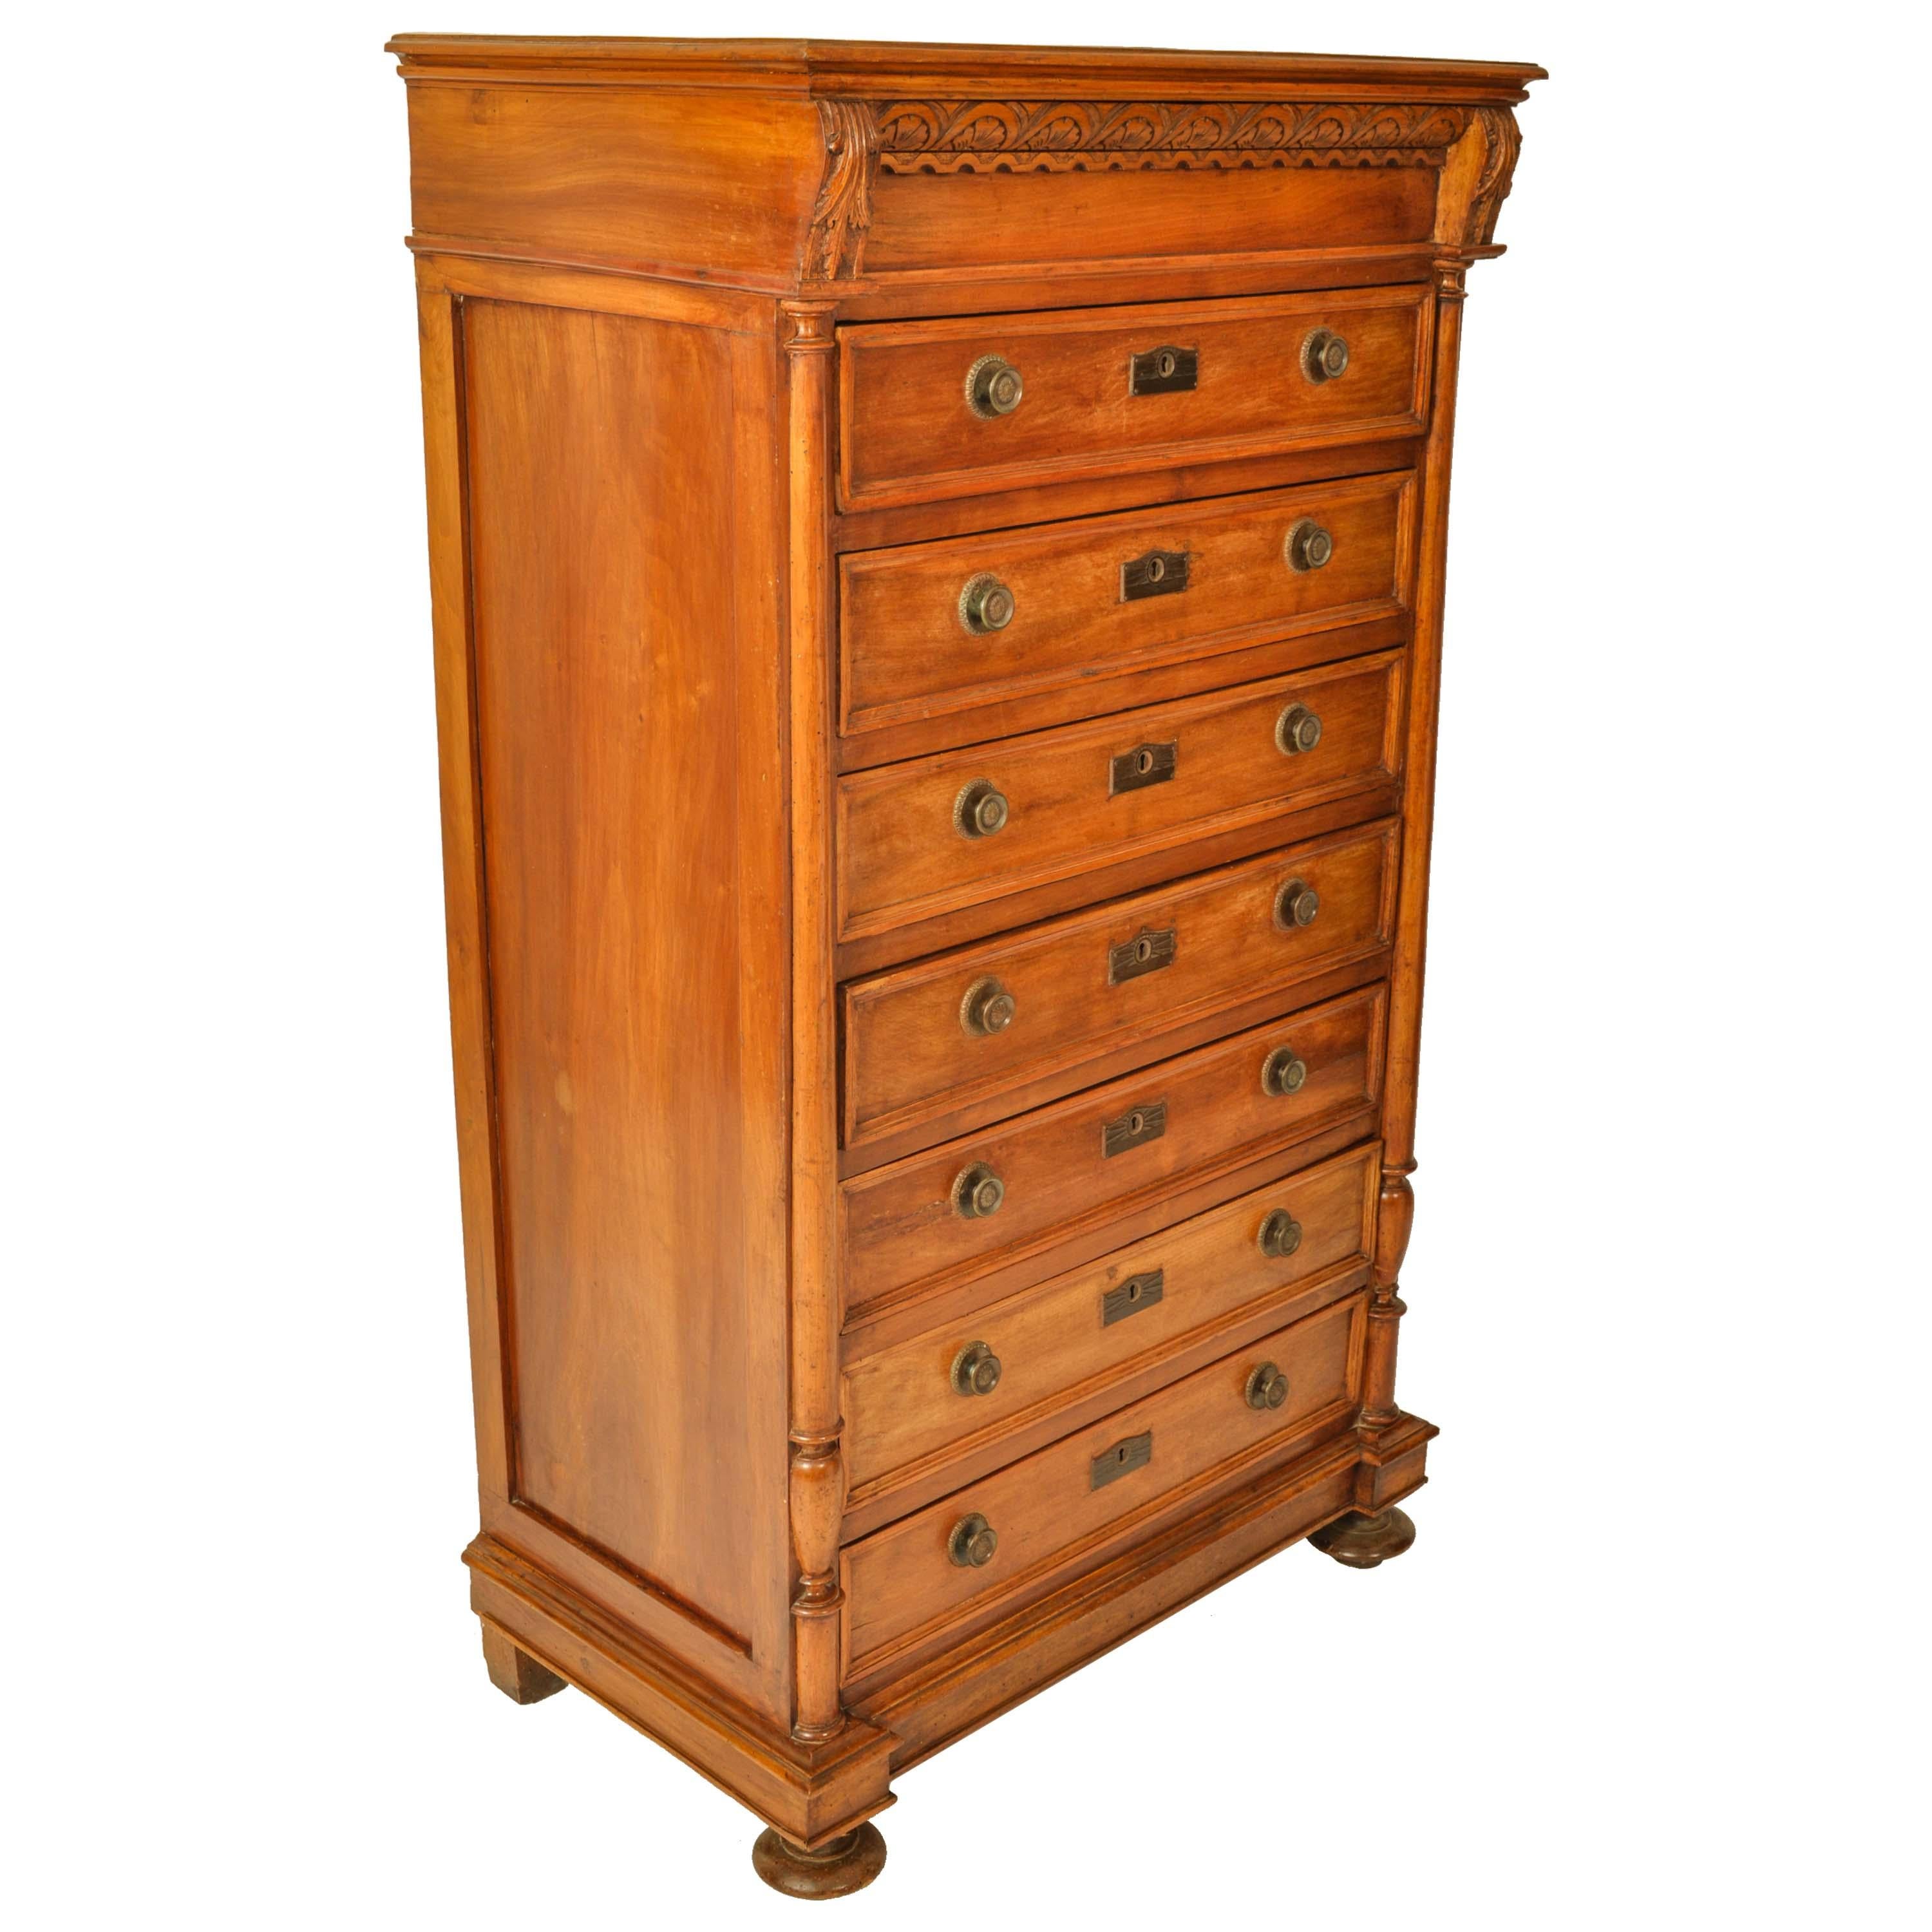 Late 19th Century Antique French Louis XVI Cherry Semainier Seven Drawer Carved Chest Dresser 1880